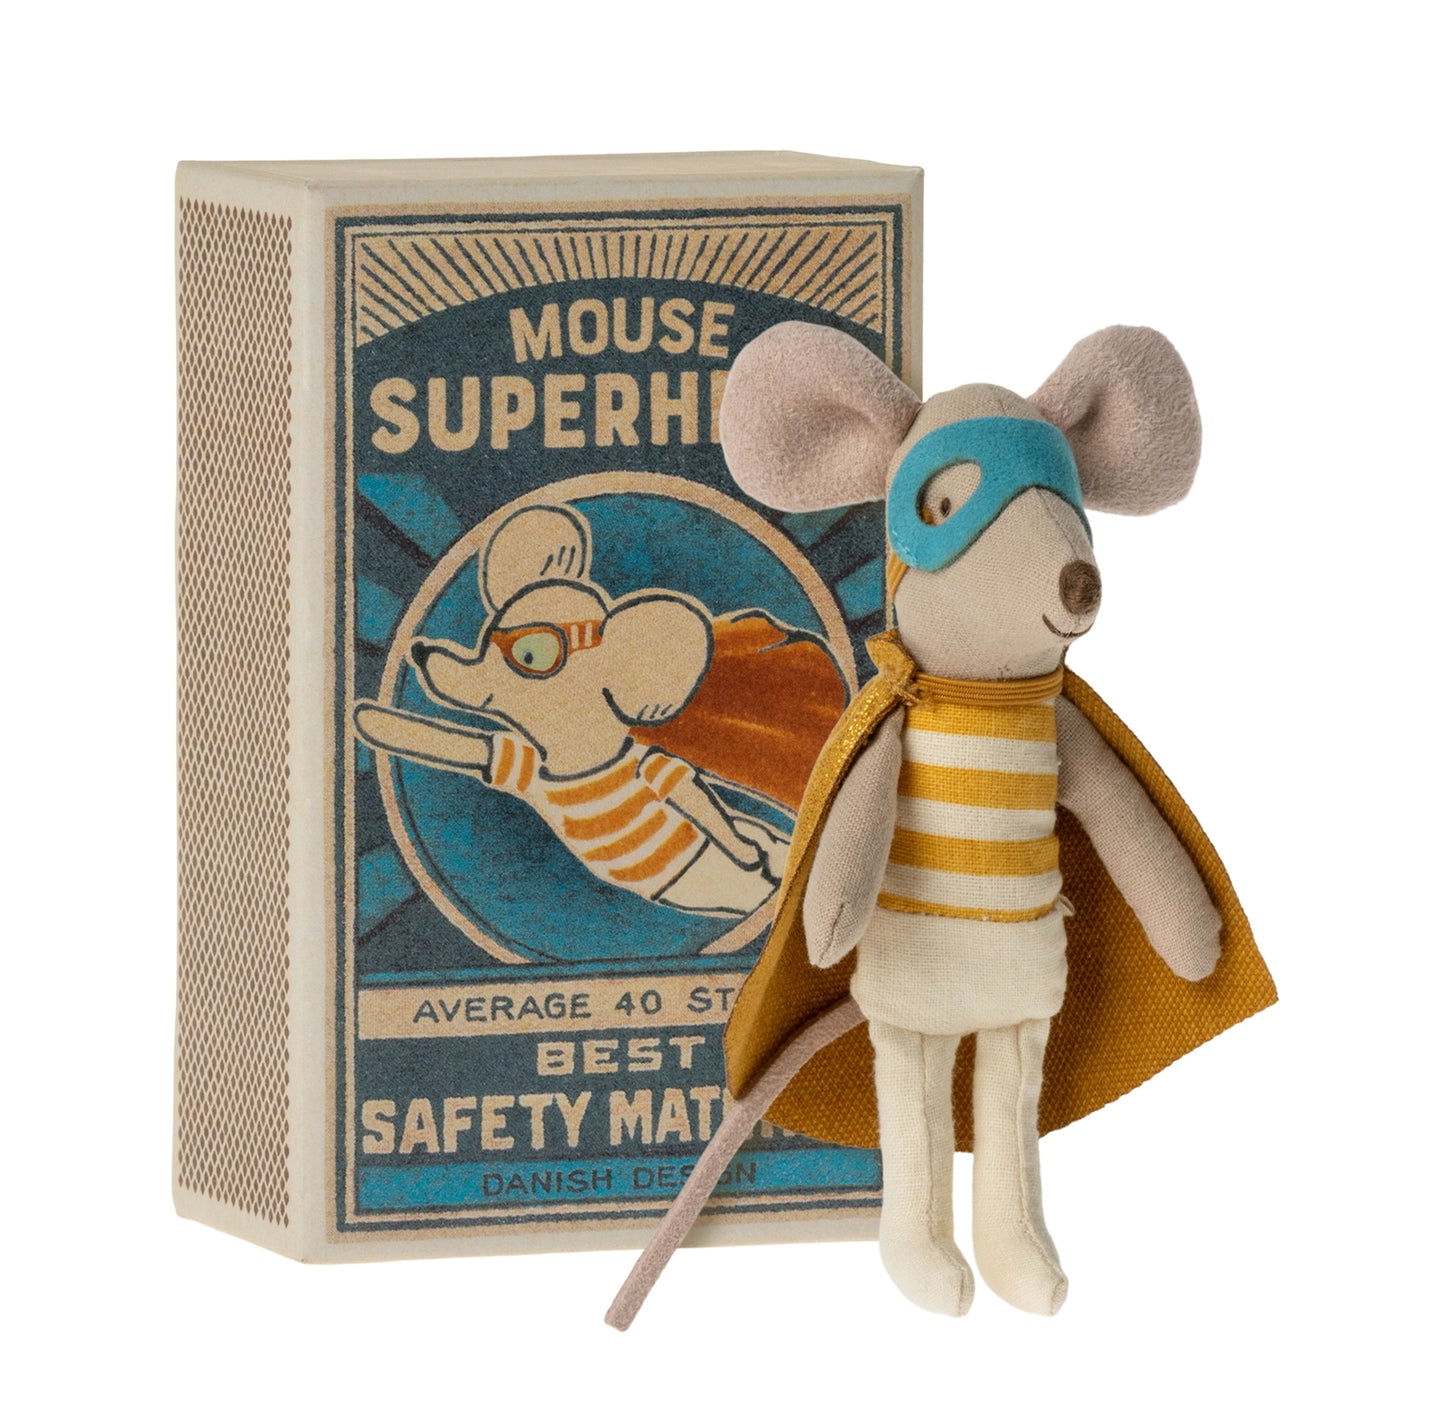 Super Hero Mouse in Matchbox